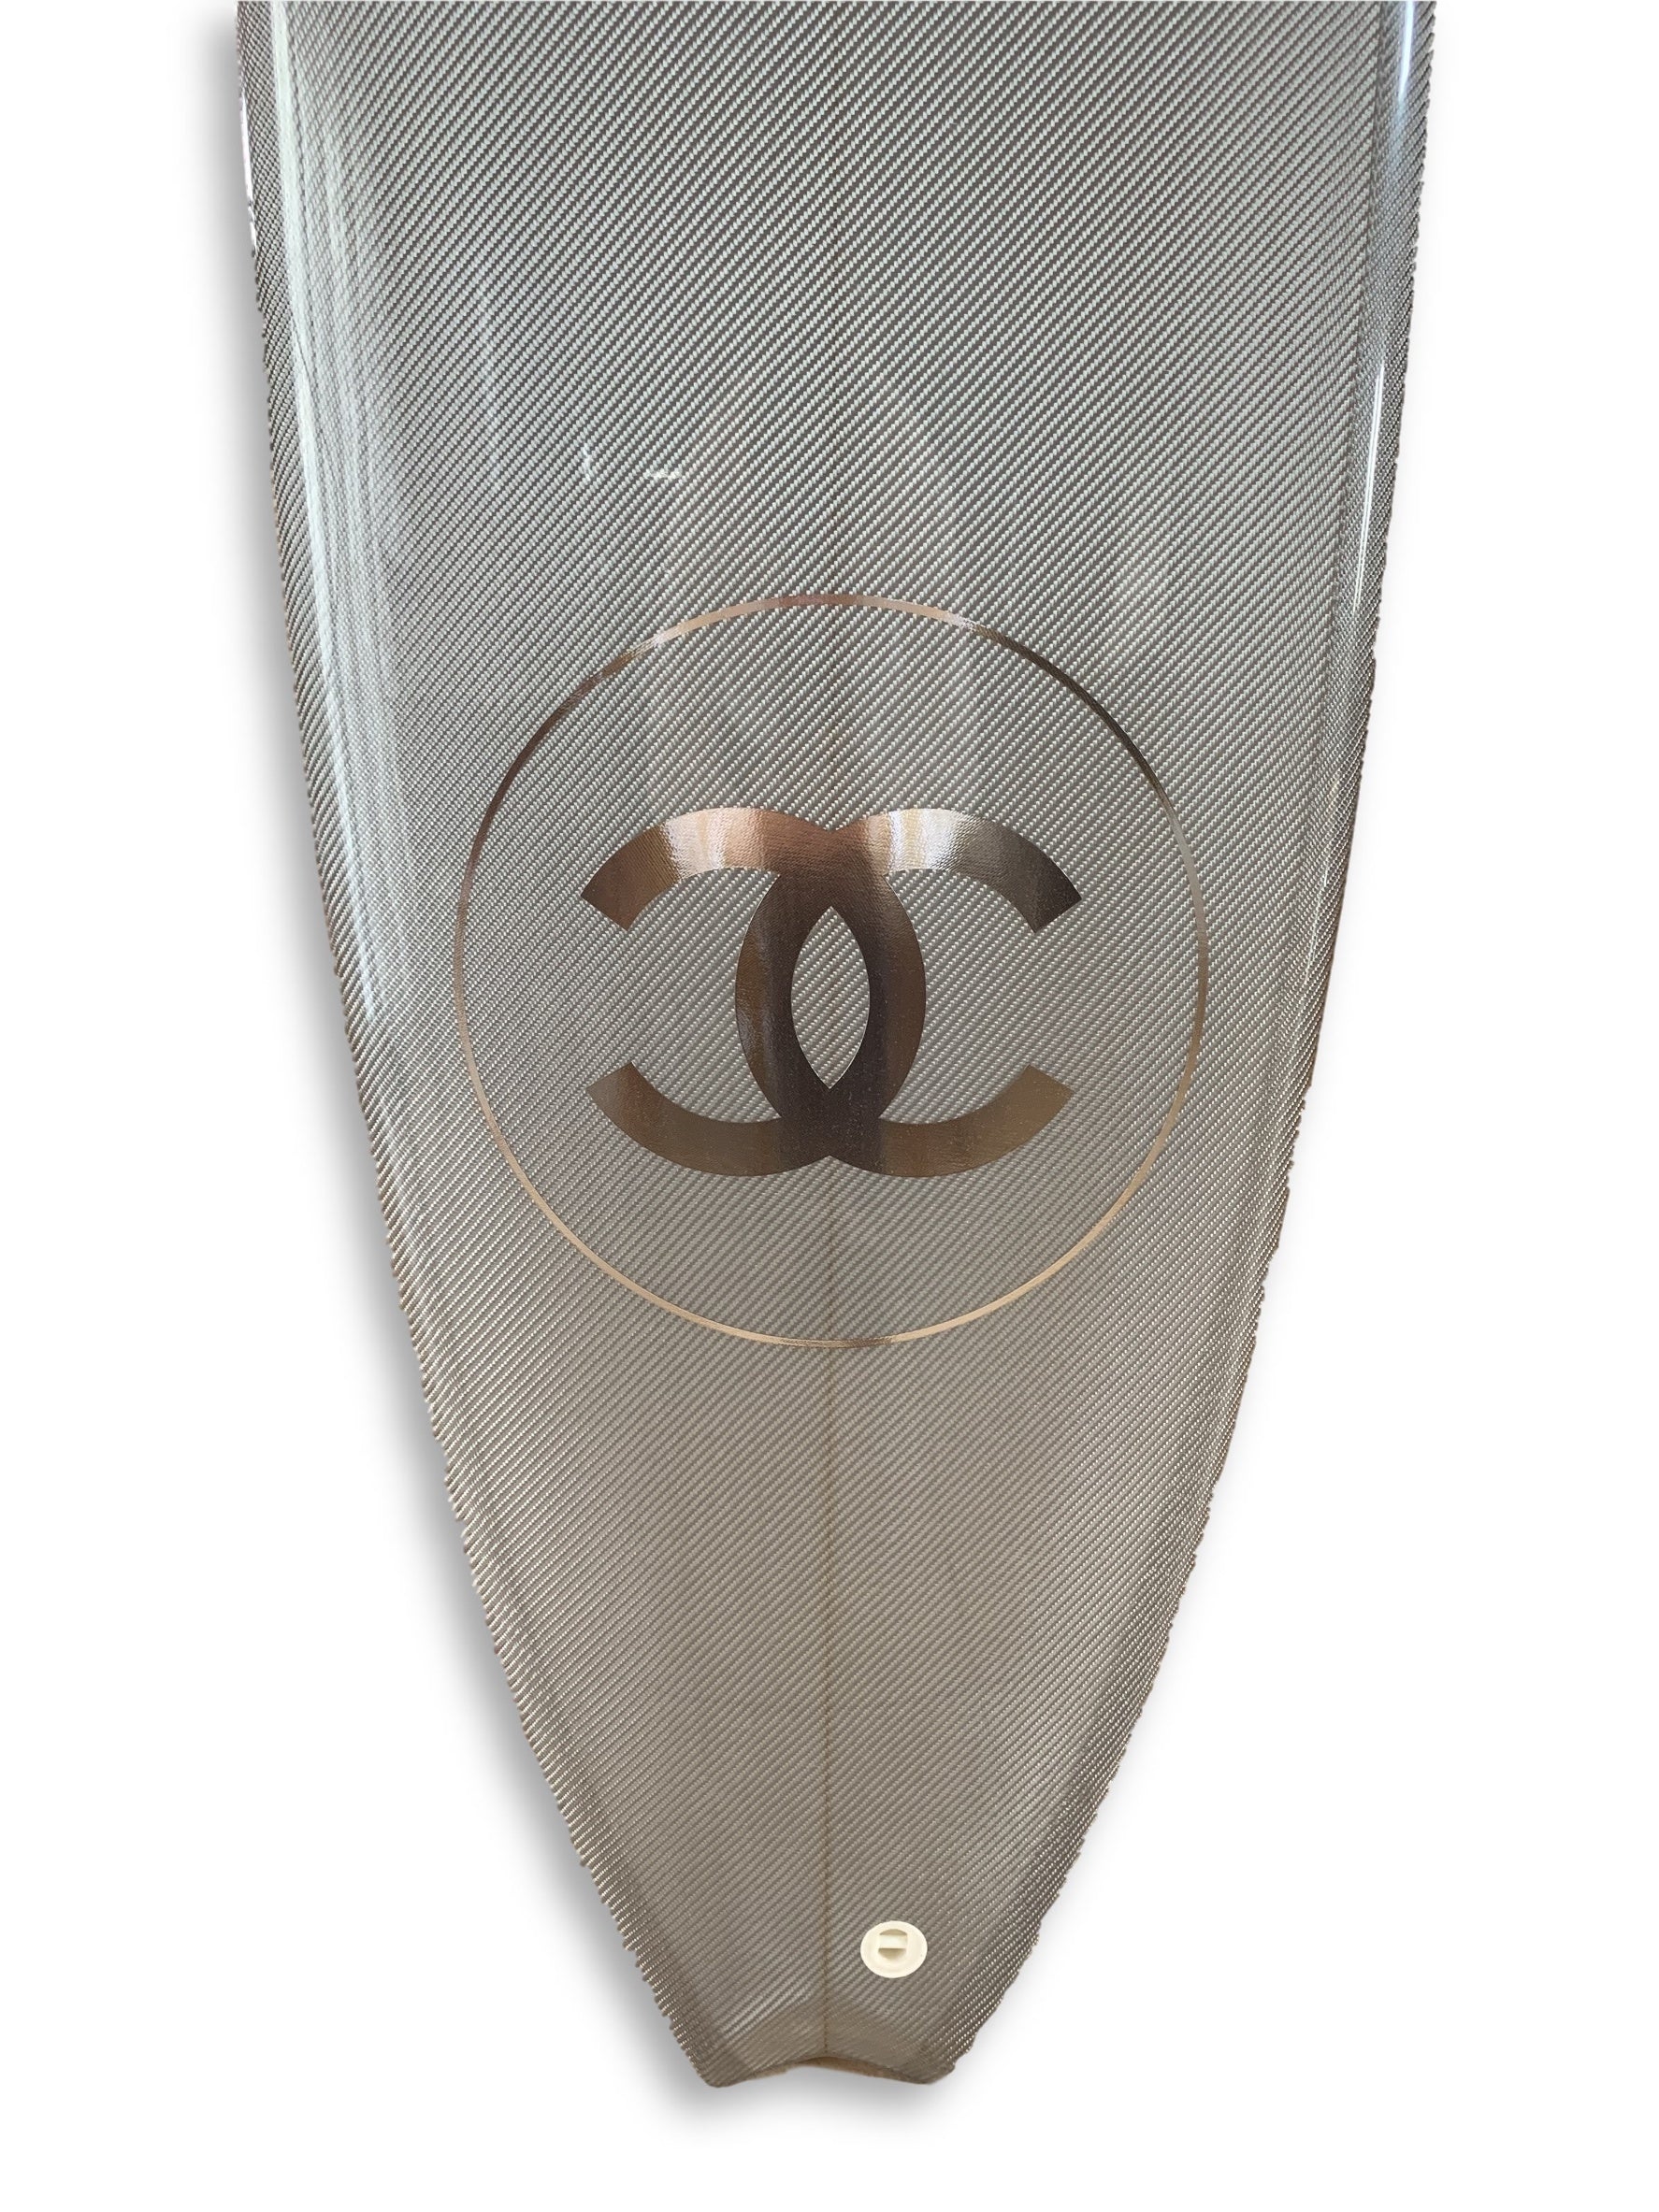 Chanel x Philippe Barland Limited Edition Silver/Chrome Carbon Surfboard